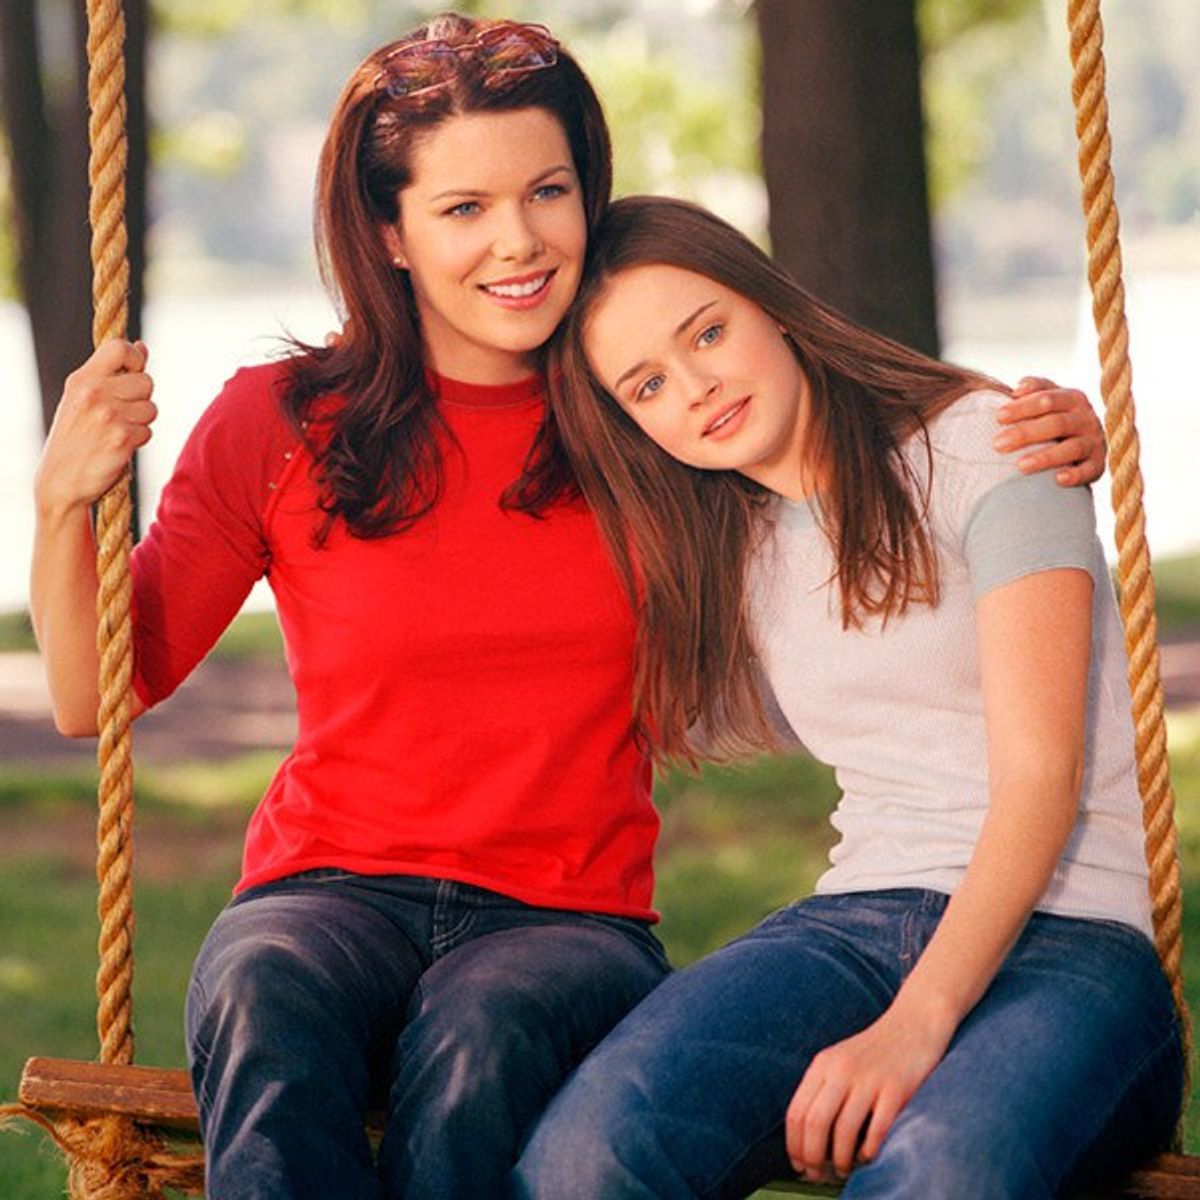 Long Flights As Told By The Gilmore Girls